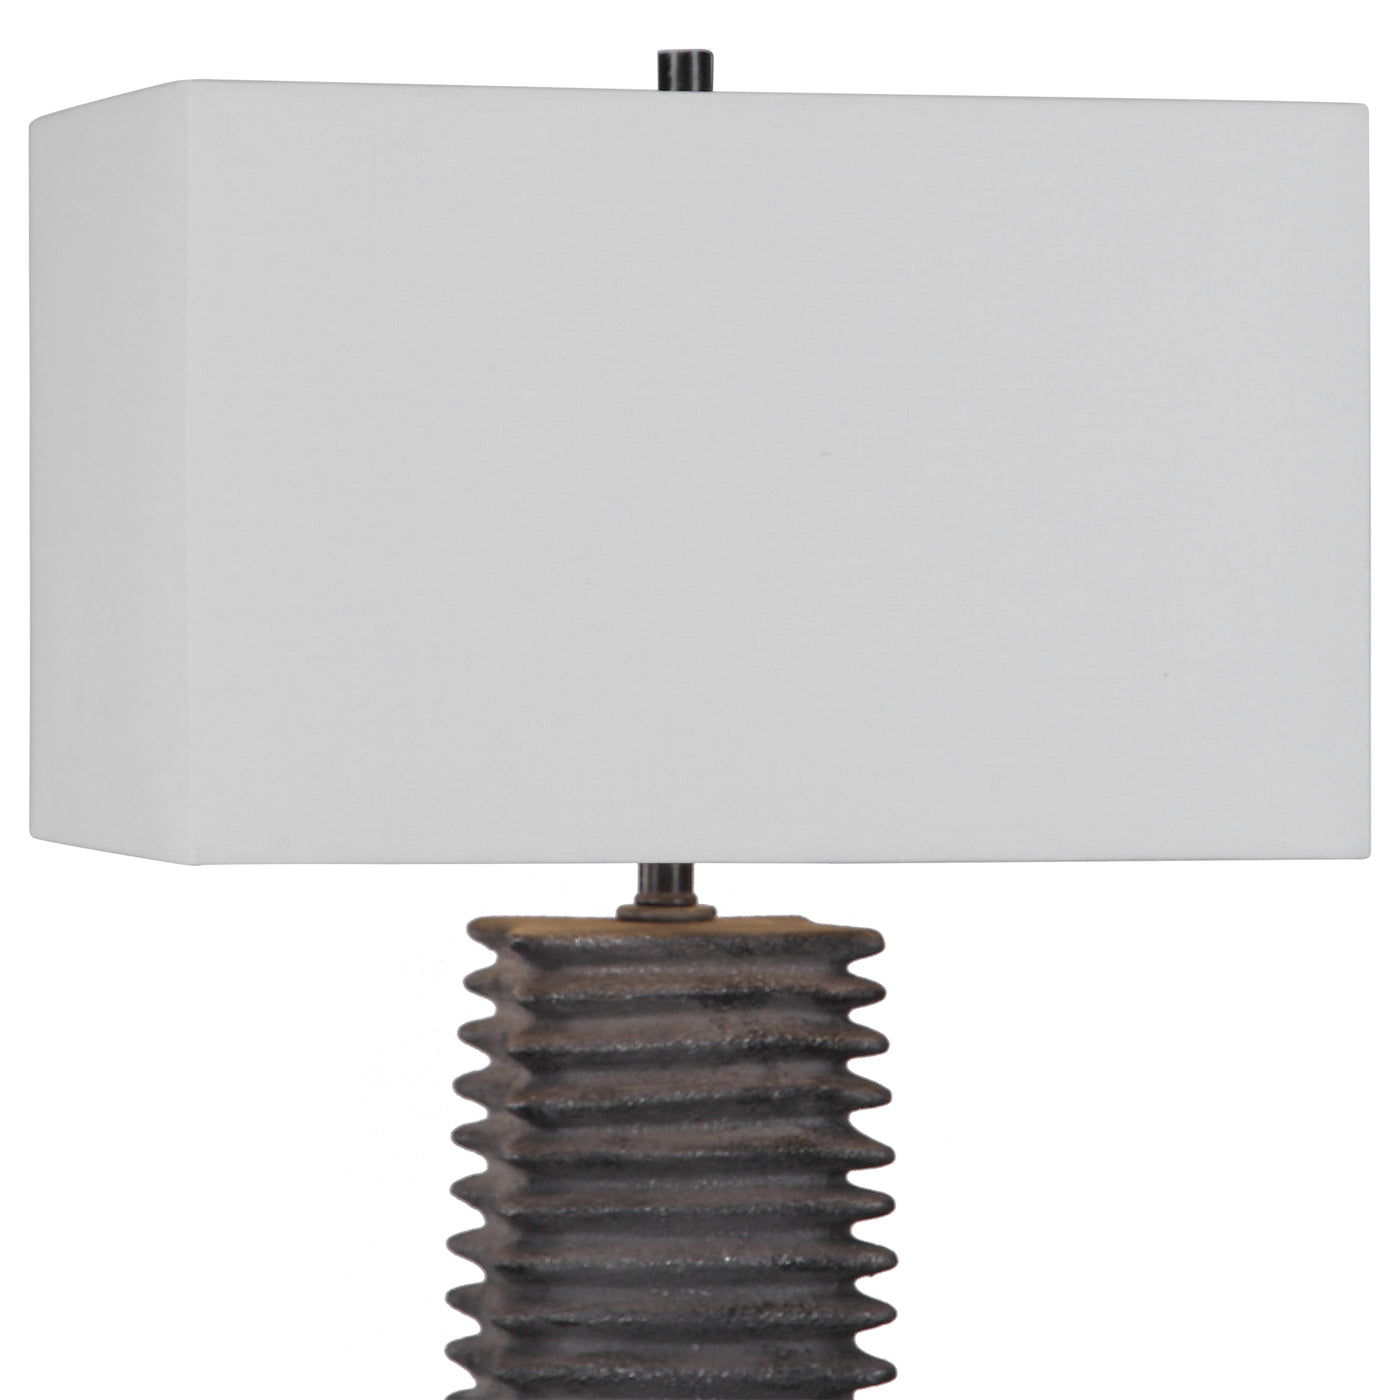 This Ceramic Table Lamp Features A Deep Ribbed Texture With A Subtle Organic Shape Finished In A Metallic Charcoal Glaze, ...